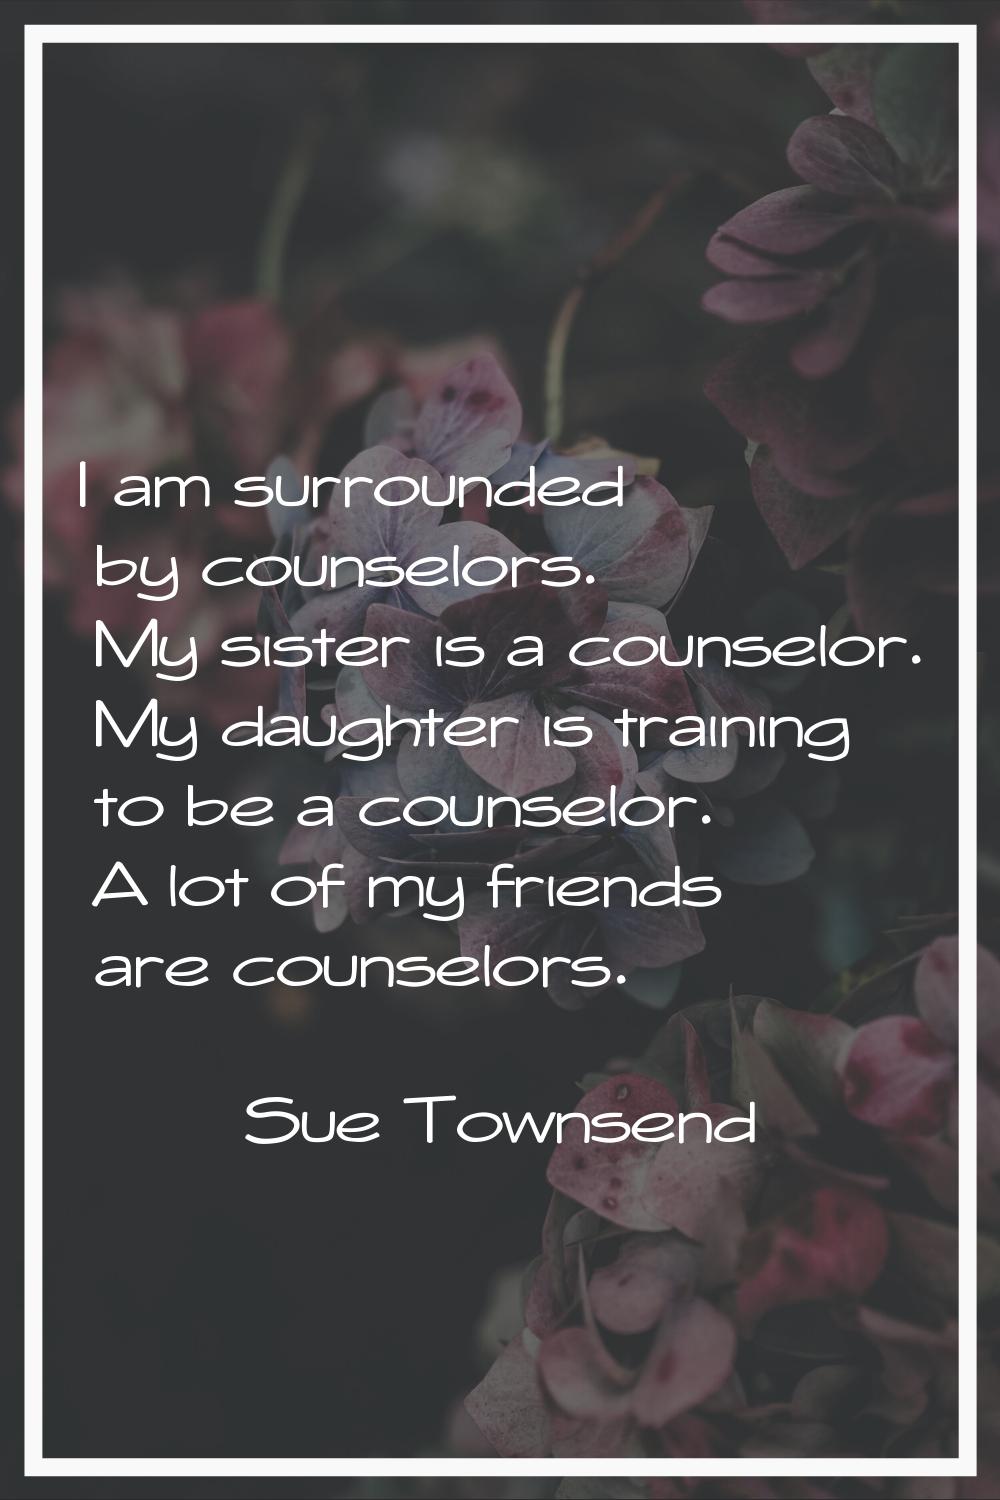 I am surrounded by counselors. My sister is a counselor. My daughter is training to be a counselor.